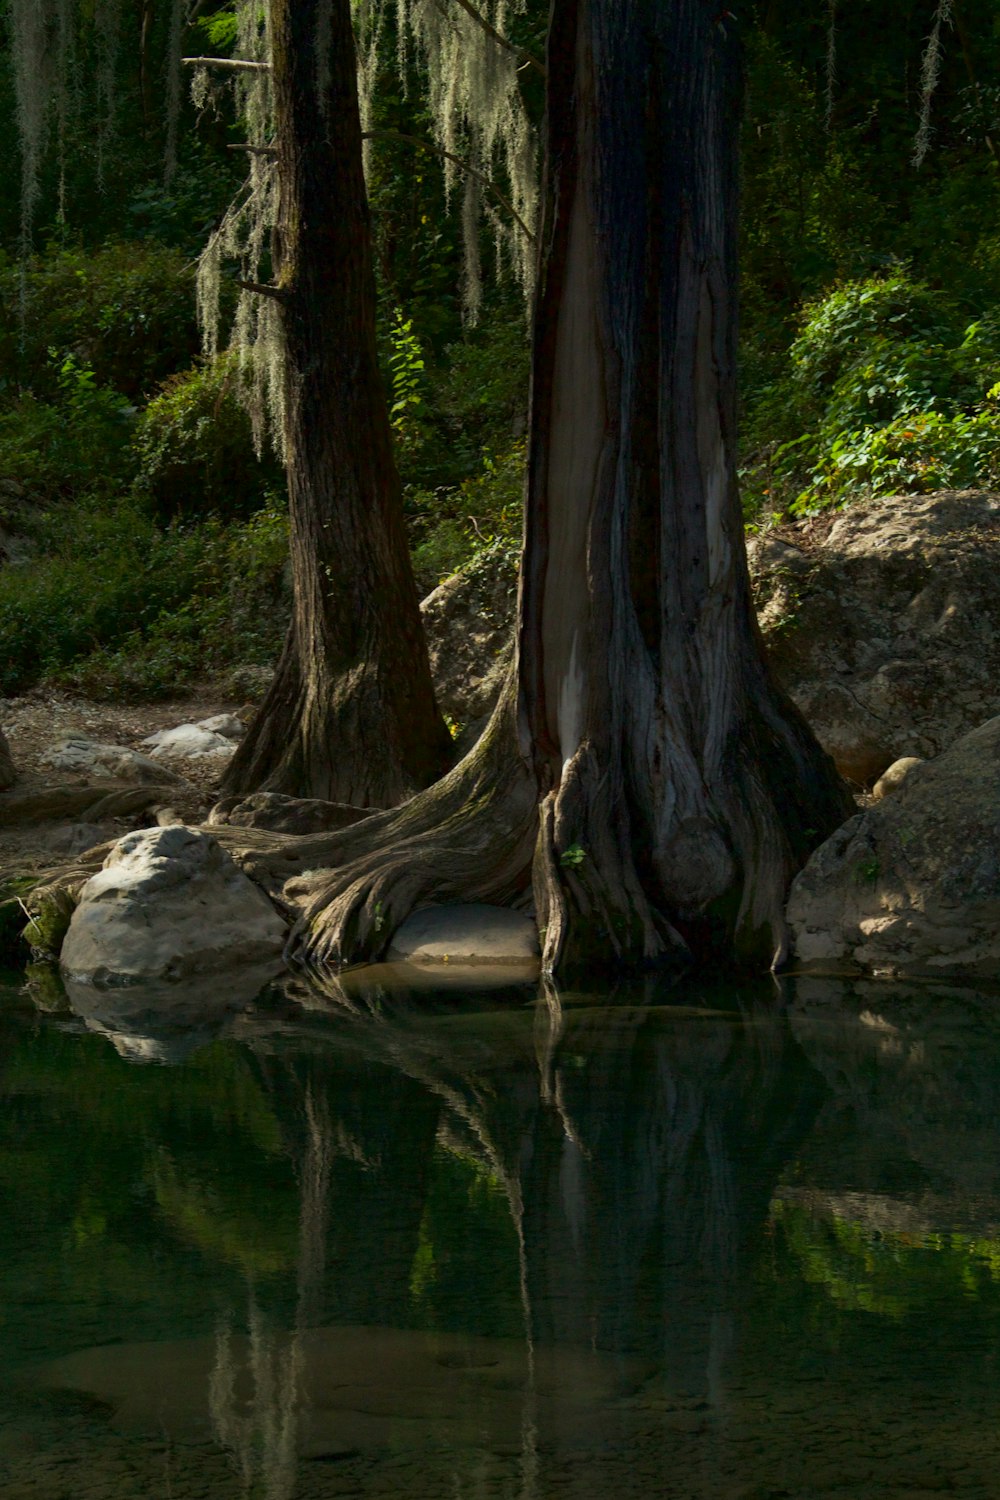 a large tree sitting next to a body of water